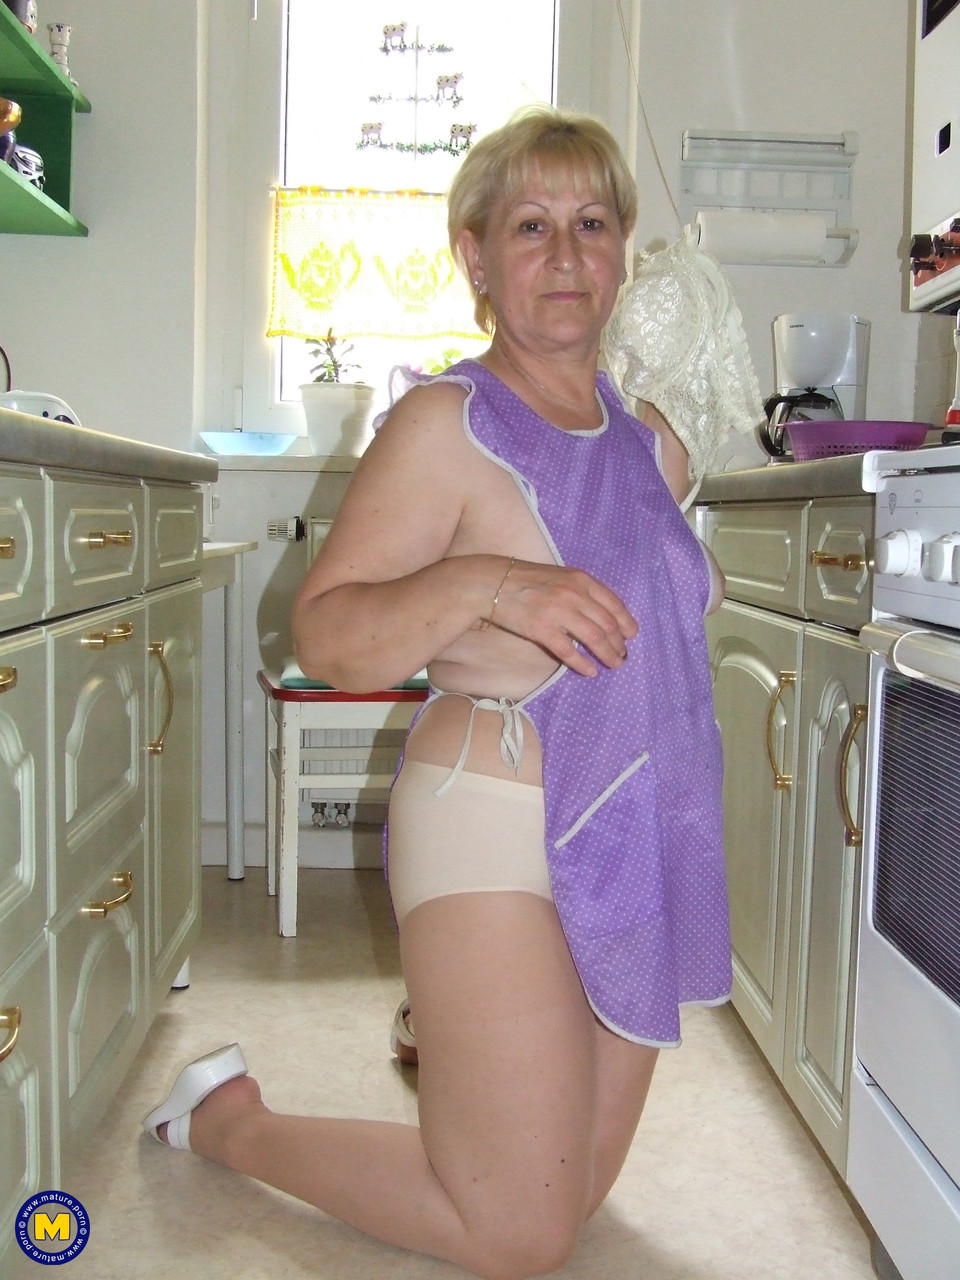 Short haired German cleaning lady Dagmar shows her mature cunt in the kitchen 포르노 사진 #425226963 | Mature NL Pics, Dagmar, German, 모바일 포르노